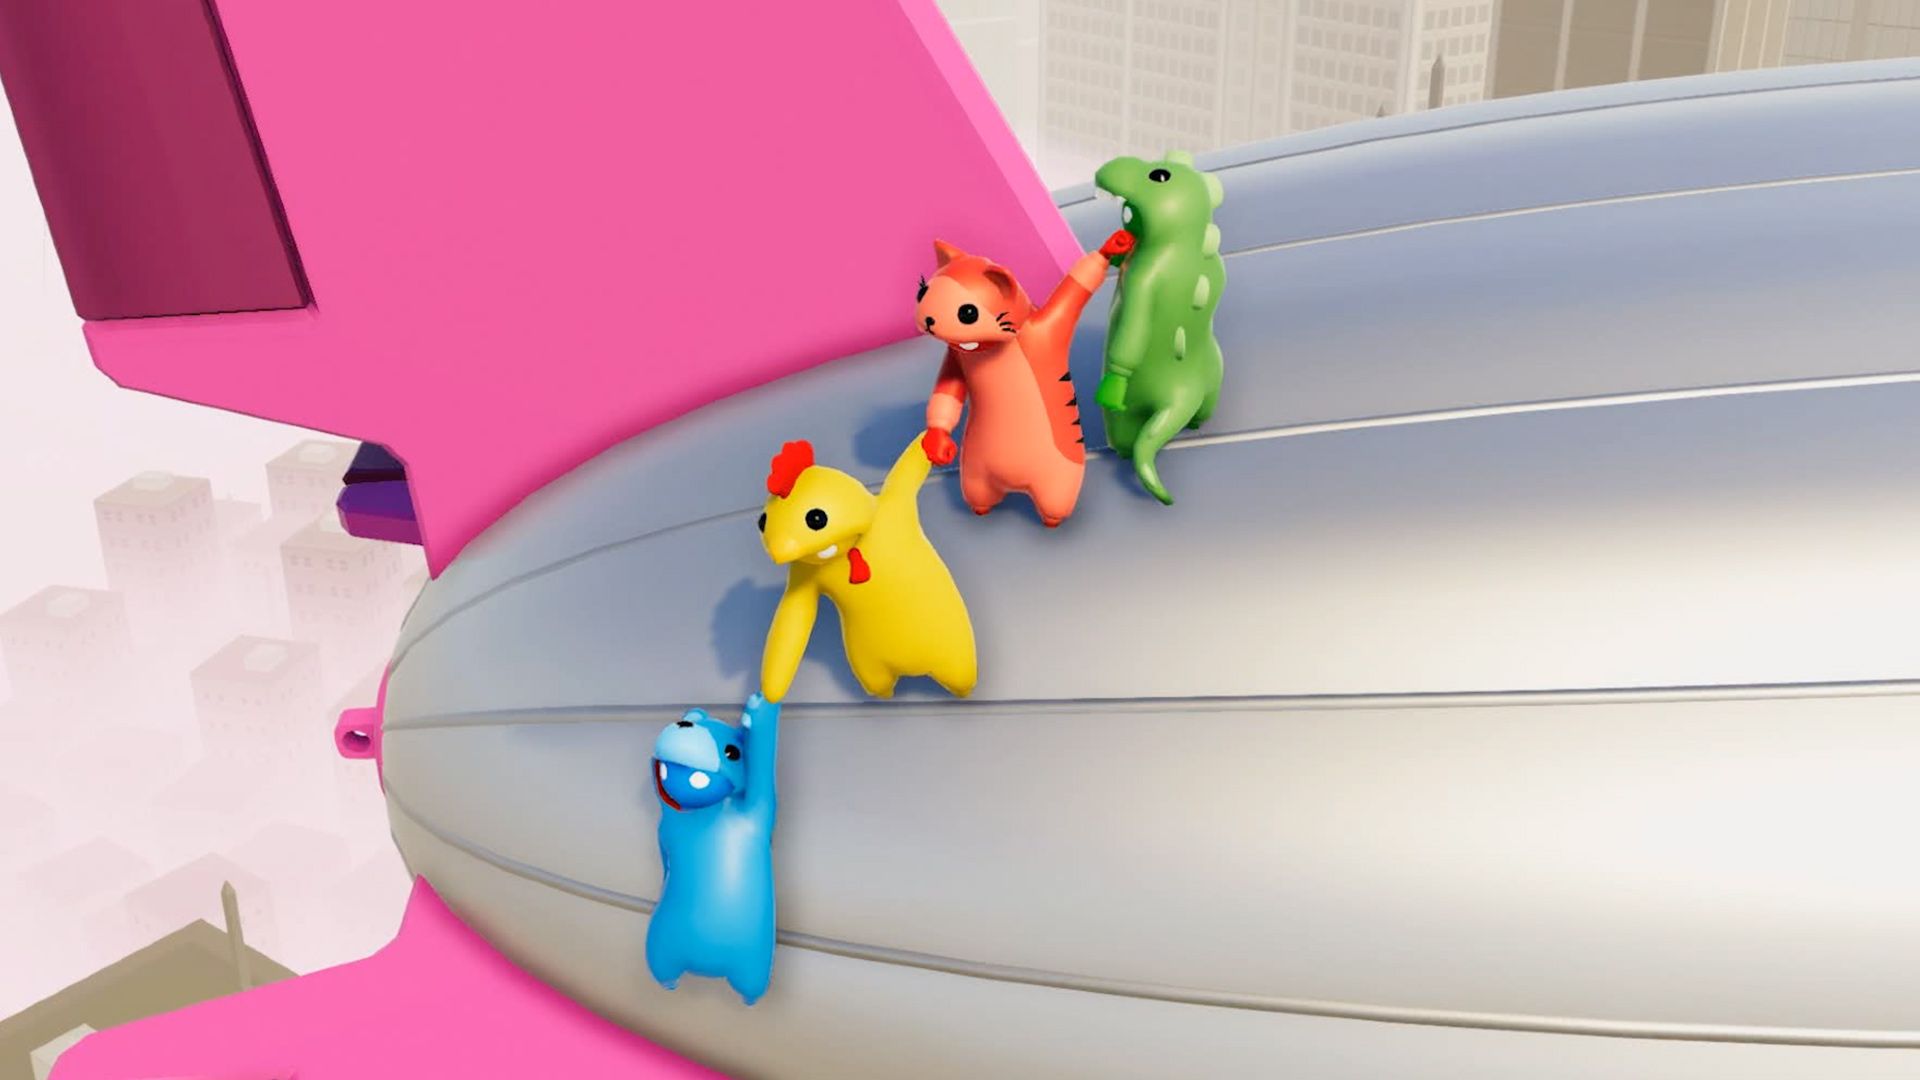 Party brawler Gang Beasts hits PS4 in two weeks